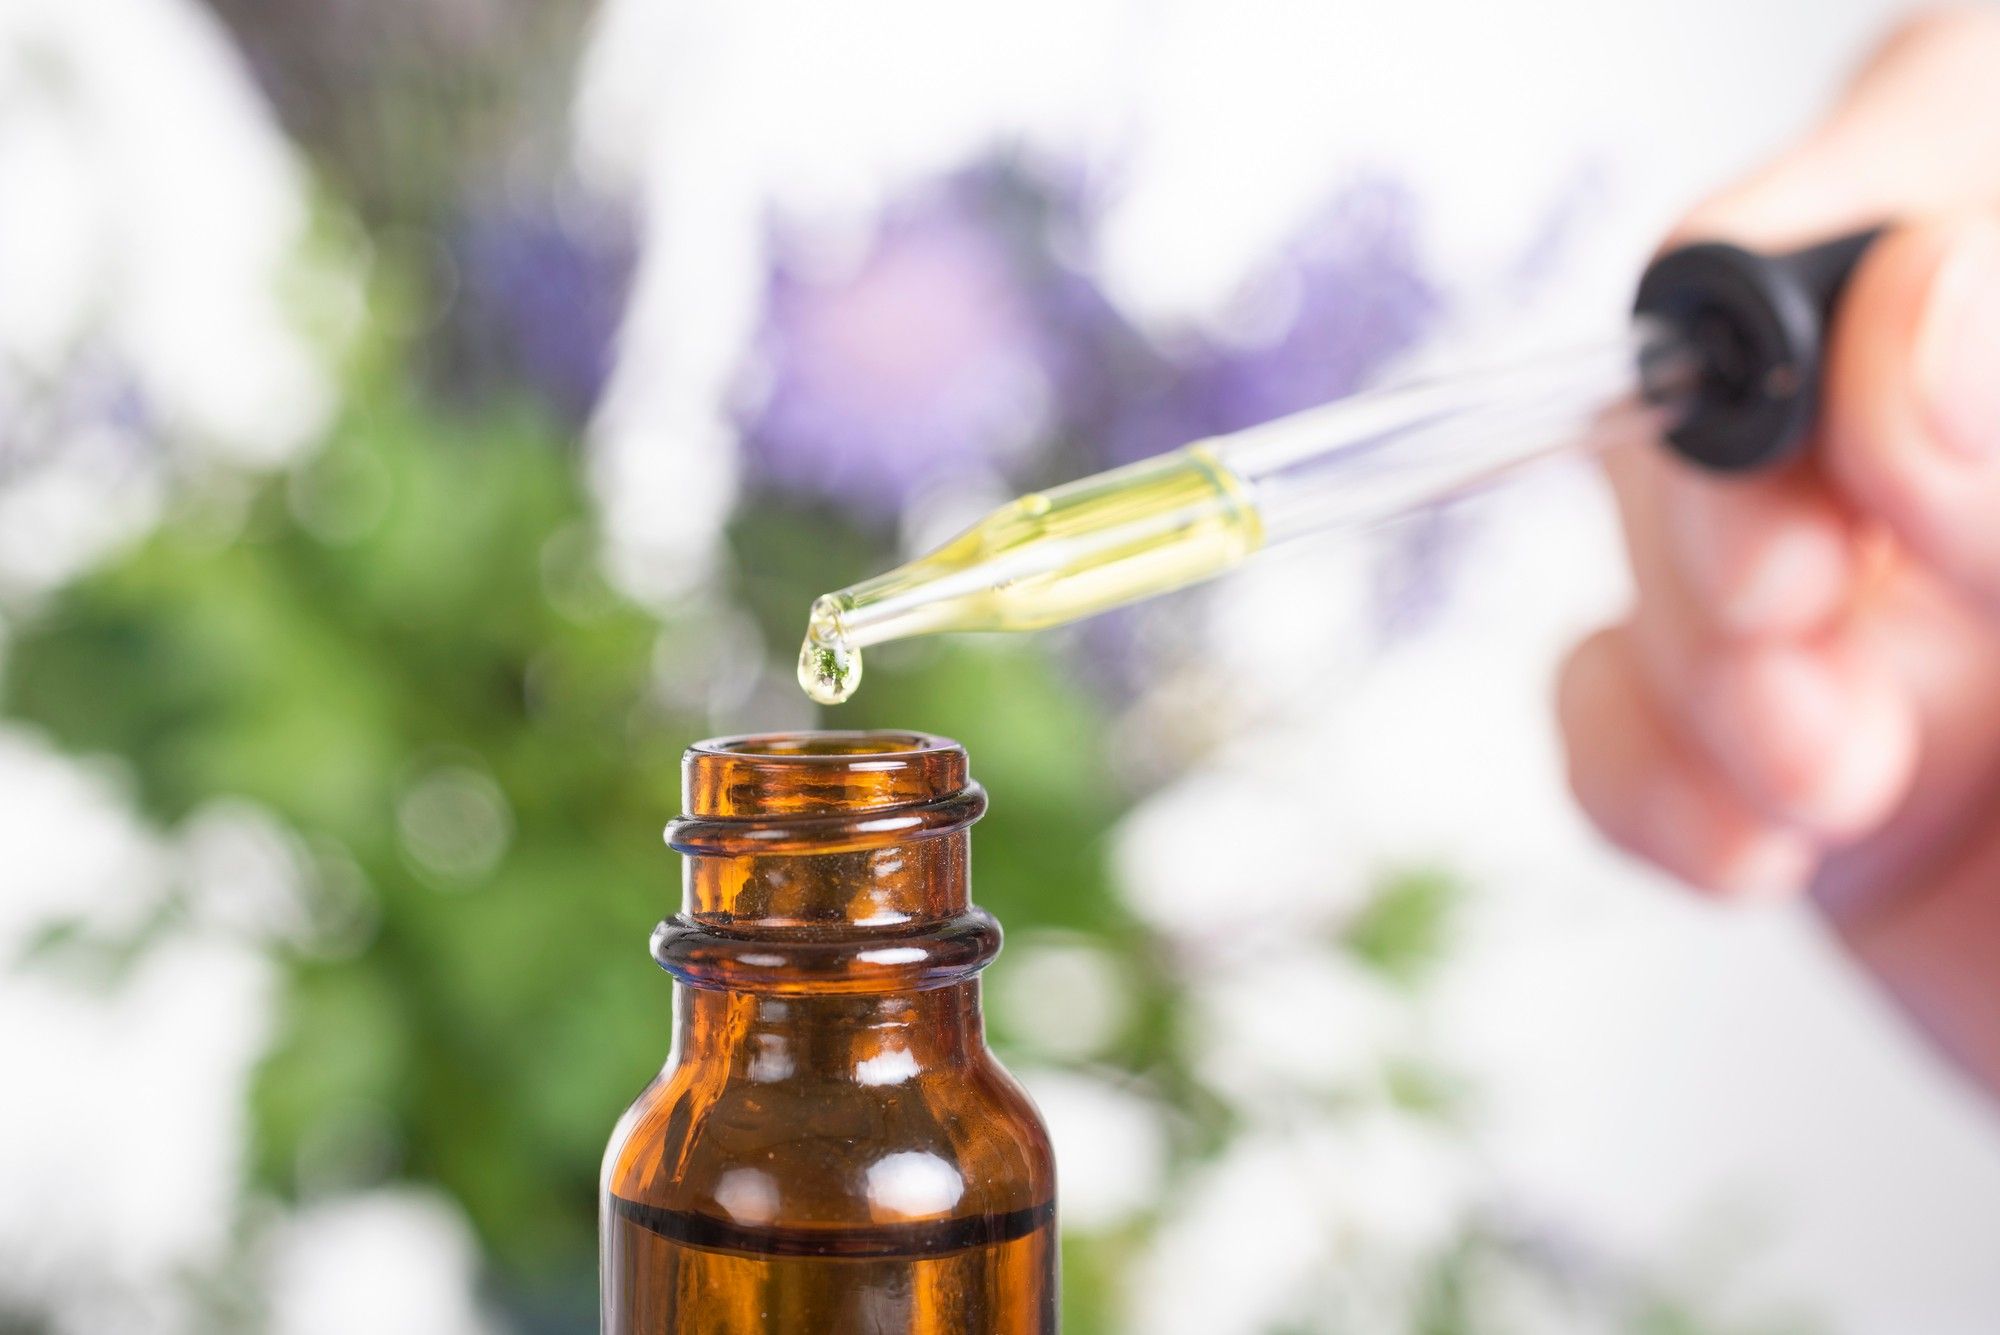 Consultants with Young Living essential oils have been marketing their products as a means of fighting the spread of COVID-19, according to recent news reports.